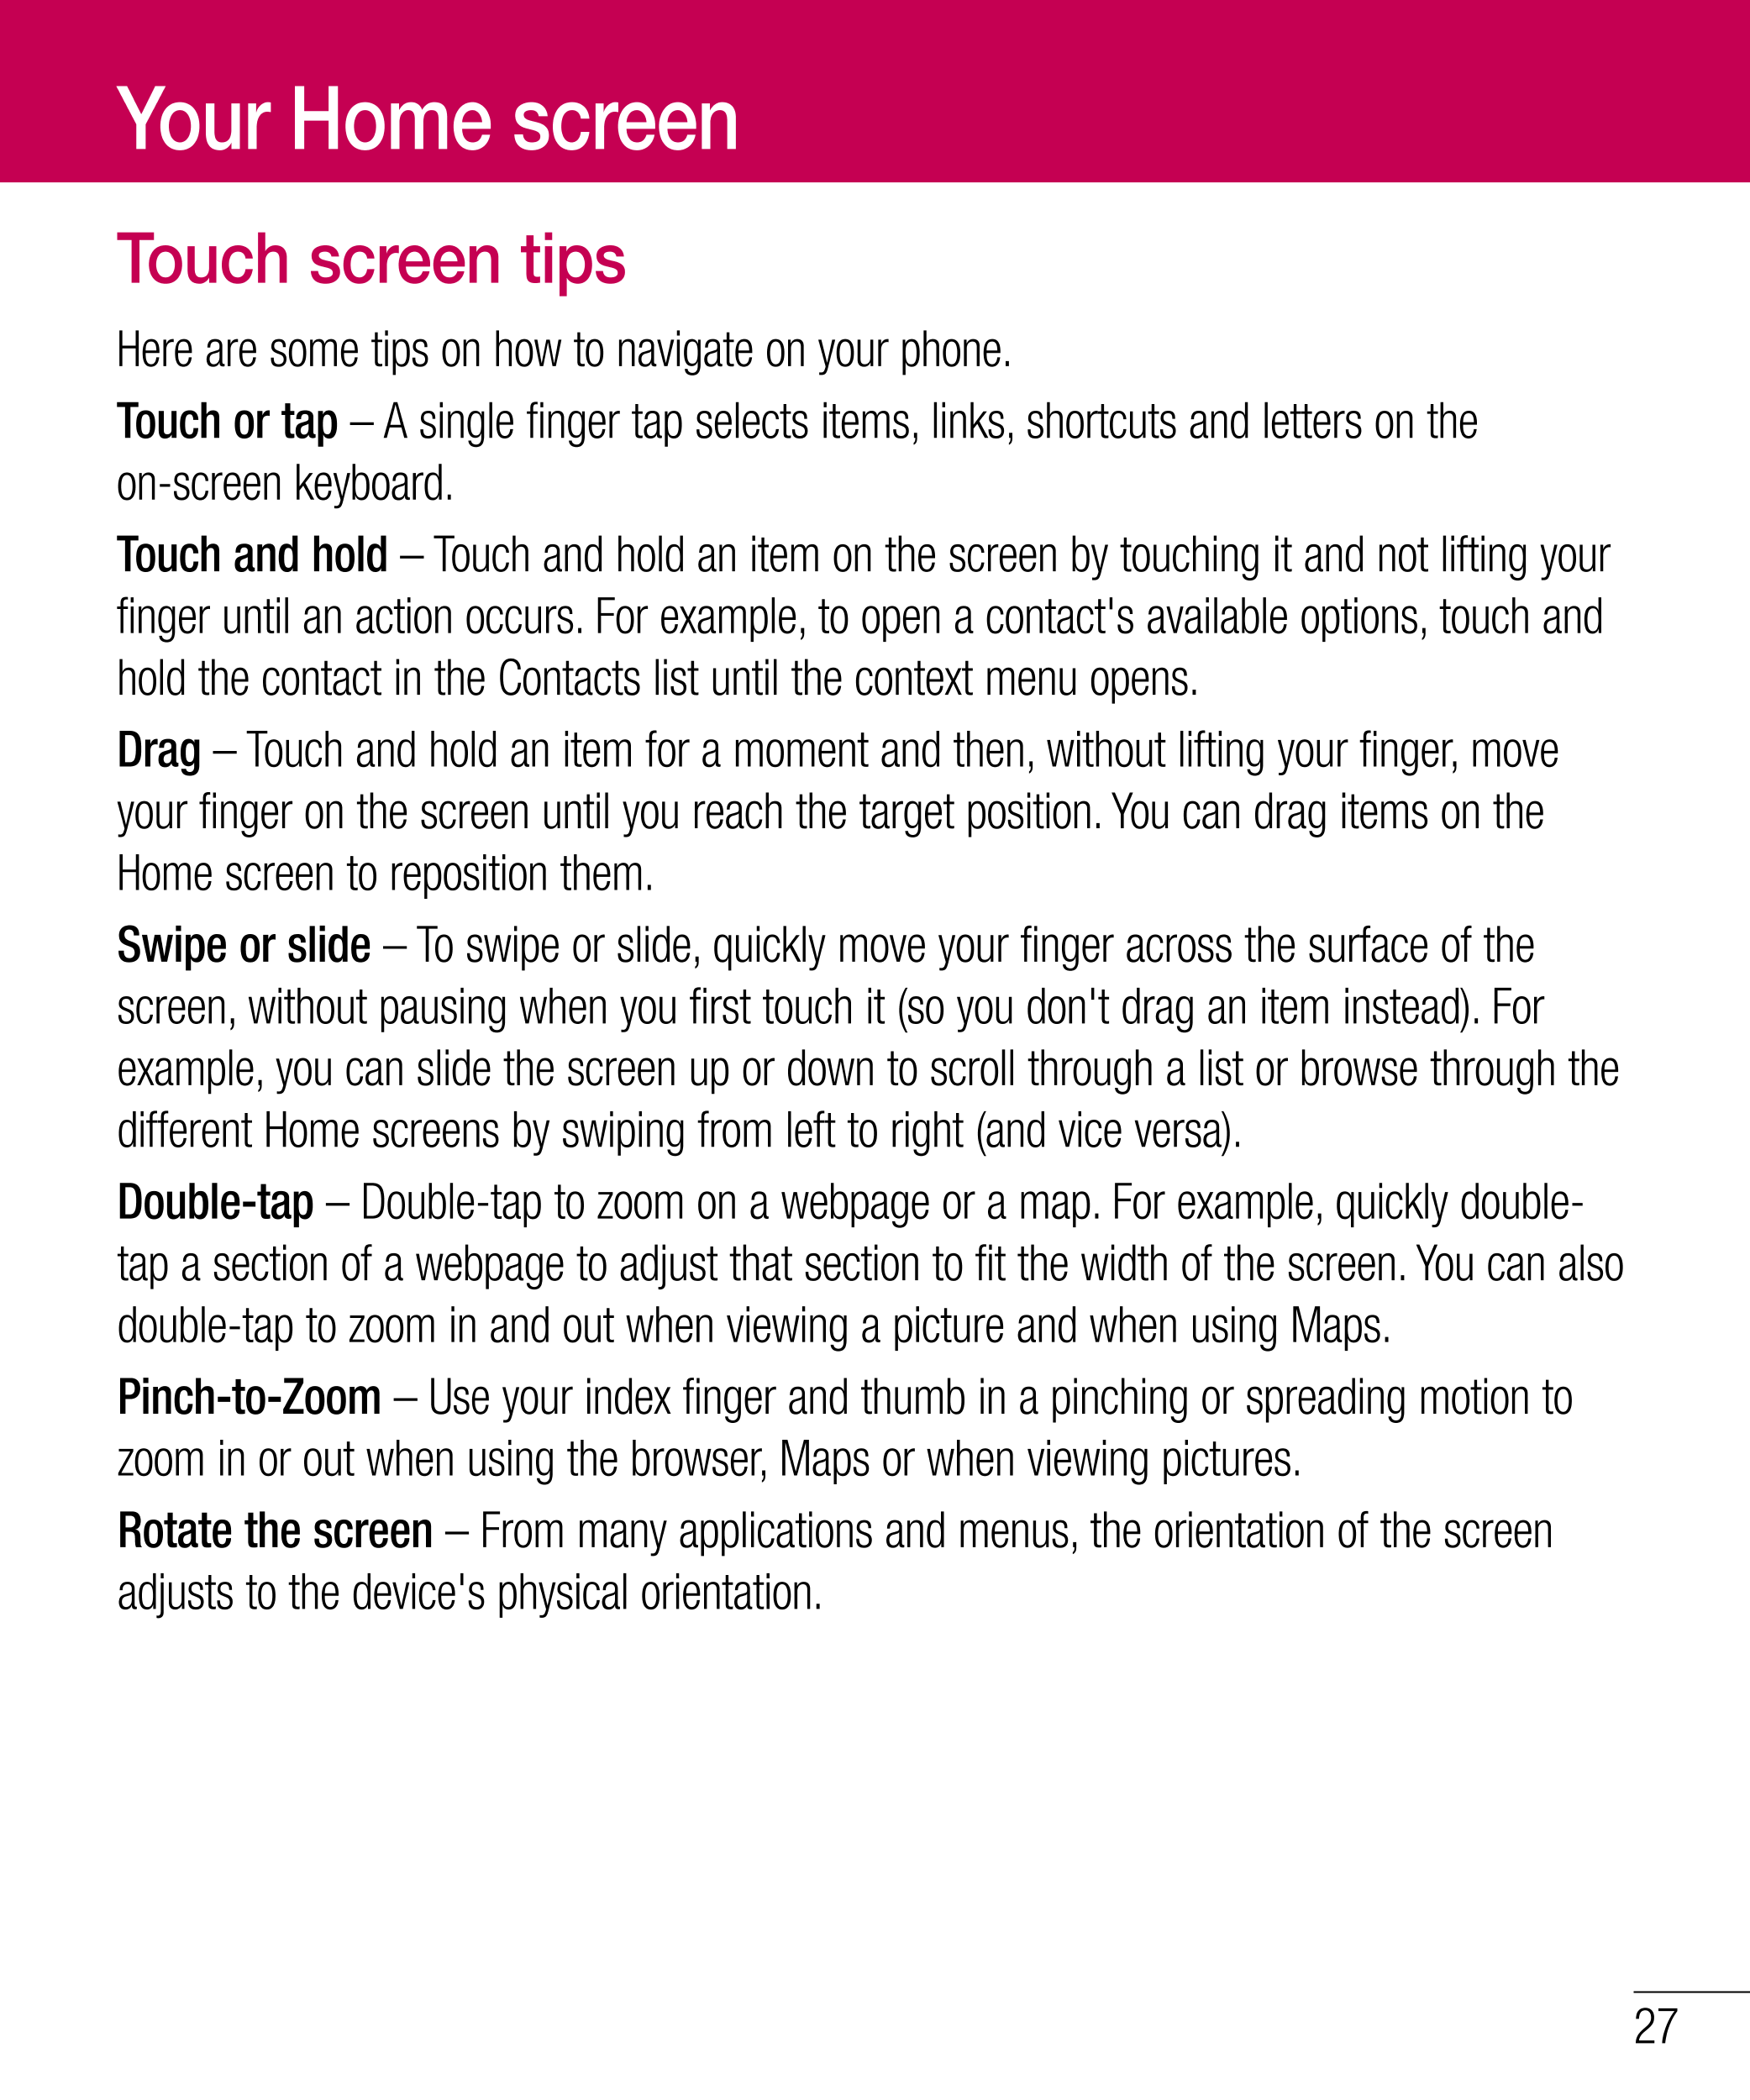 Your Home screen
Touch screen tips
Here are some tips on how to navigate on your phone.
Touch or tap – A single finger tap selec